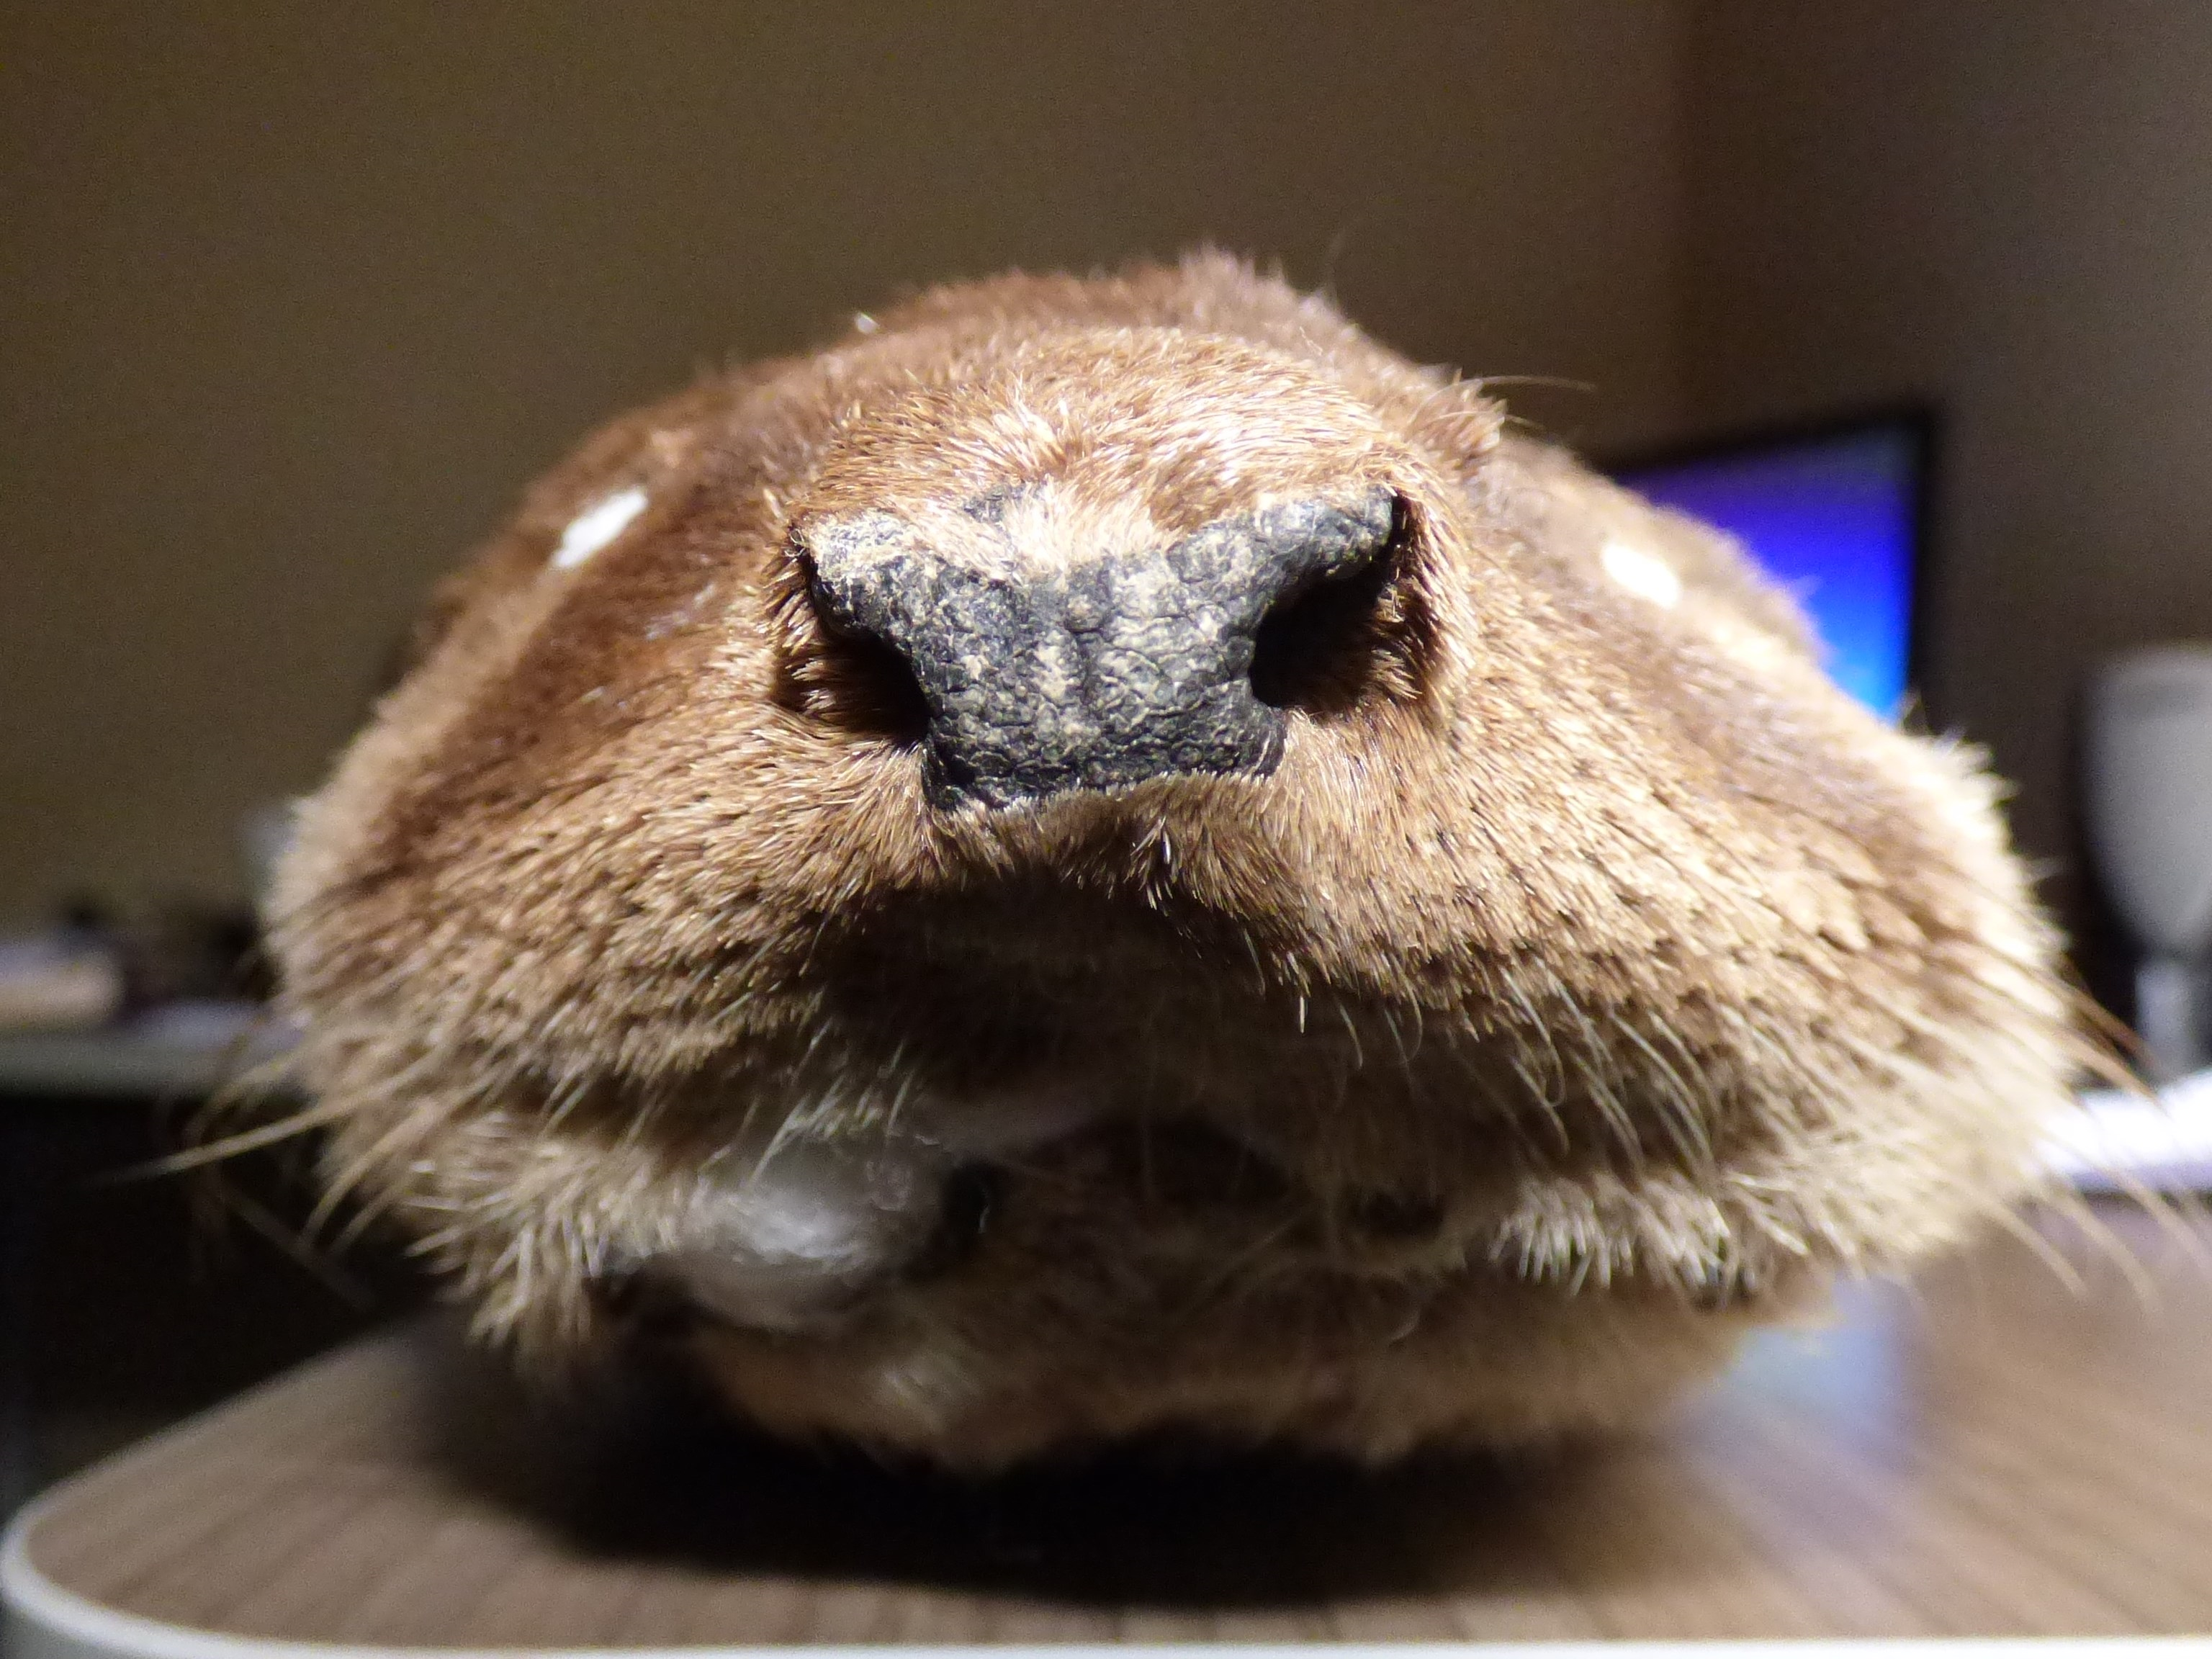 Closeup of muzzle of stuffed otter, clearly showing the hairless rhinarium and septa. 